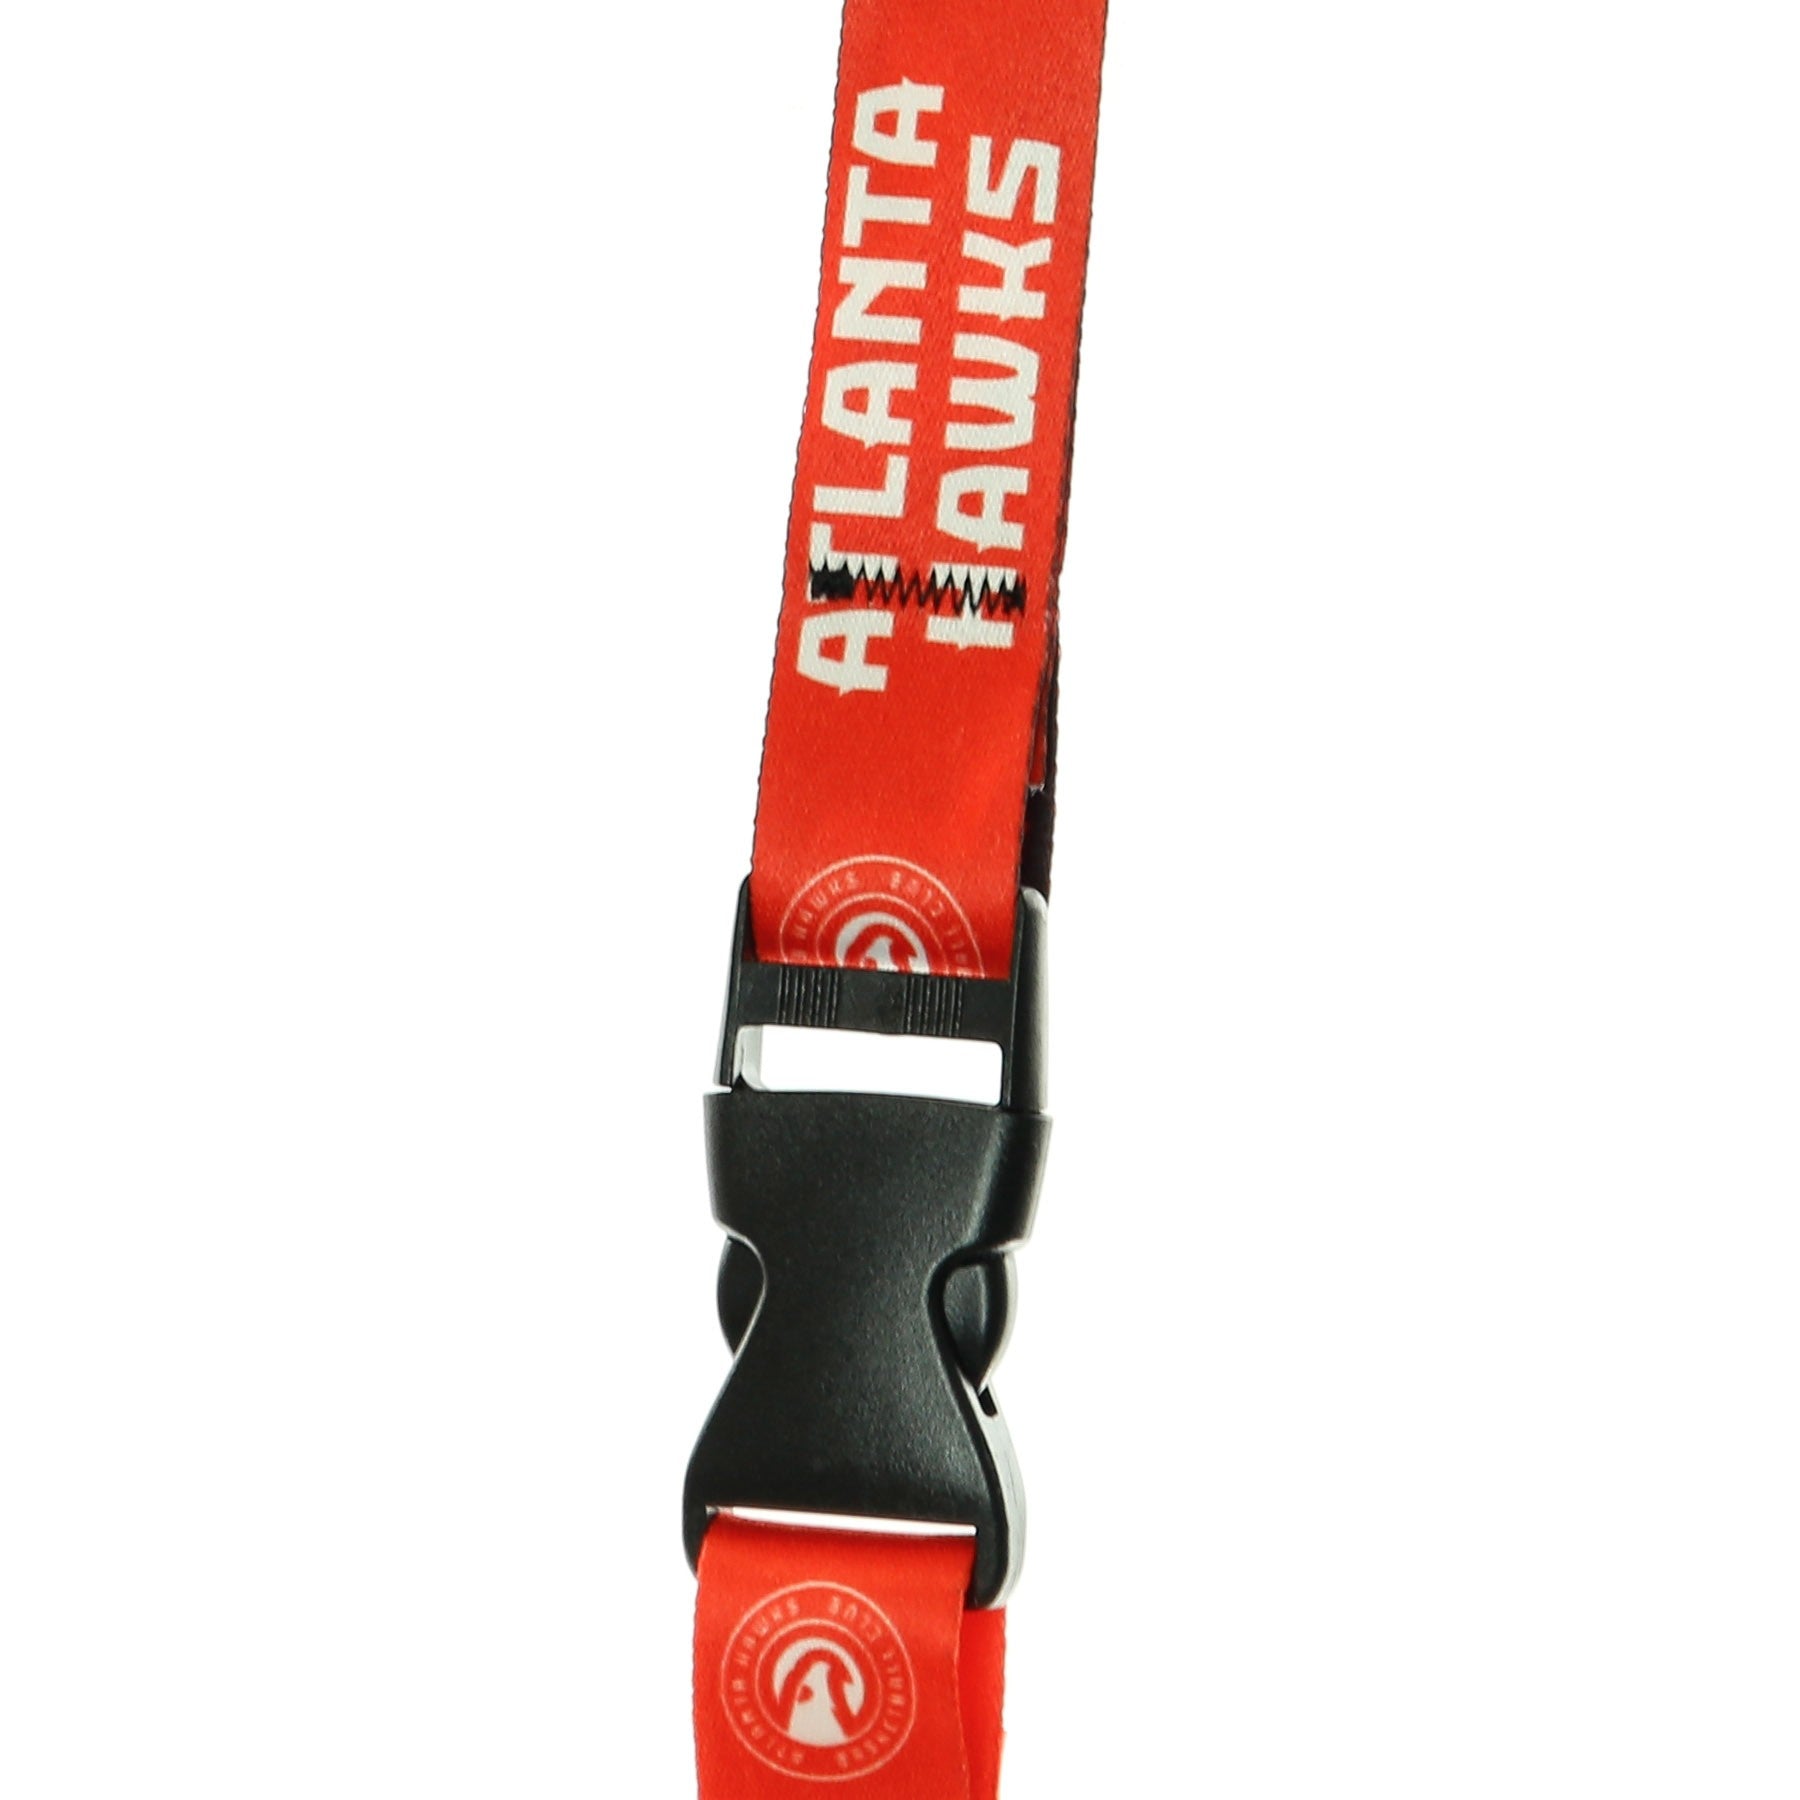 Unisex Nba Lanyard Keychain With Buckle Atlhaw Original Team Colors